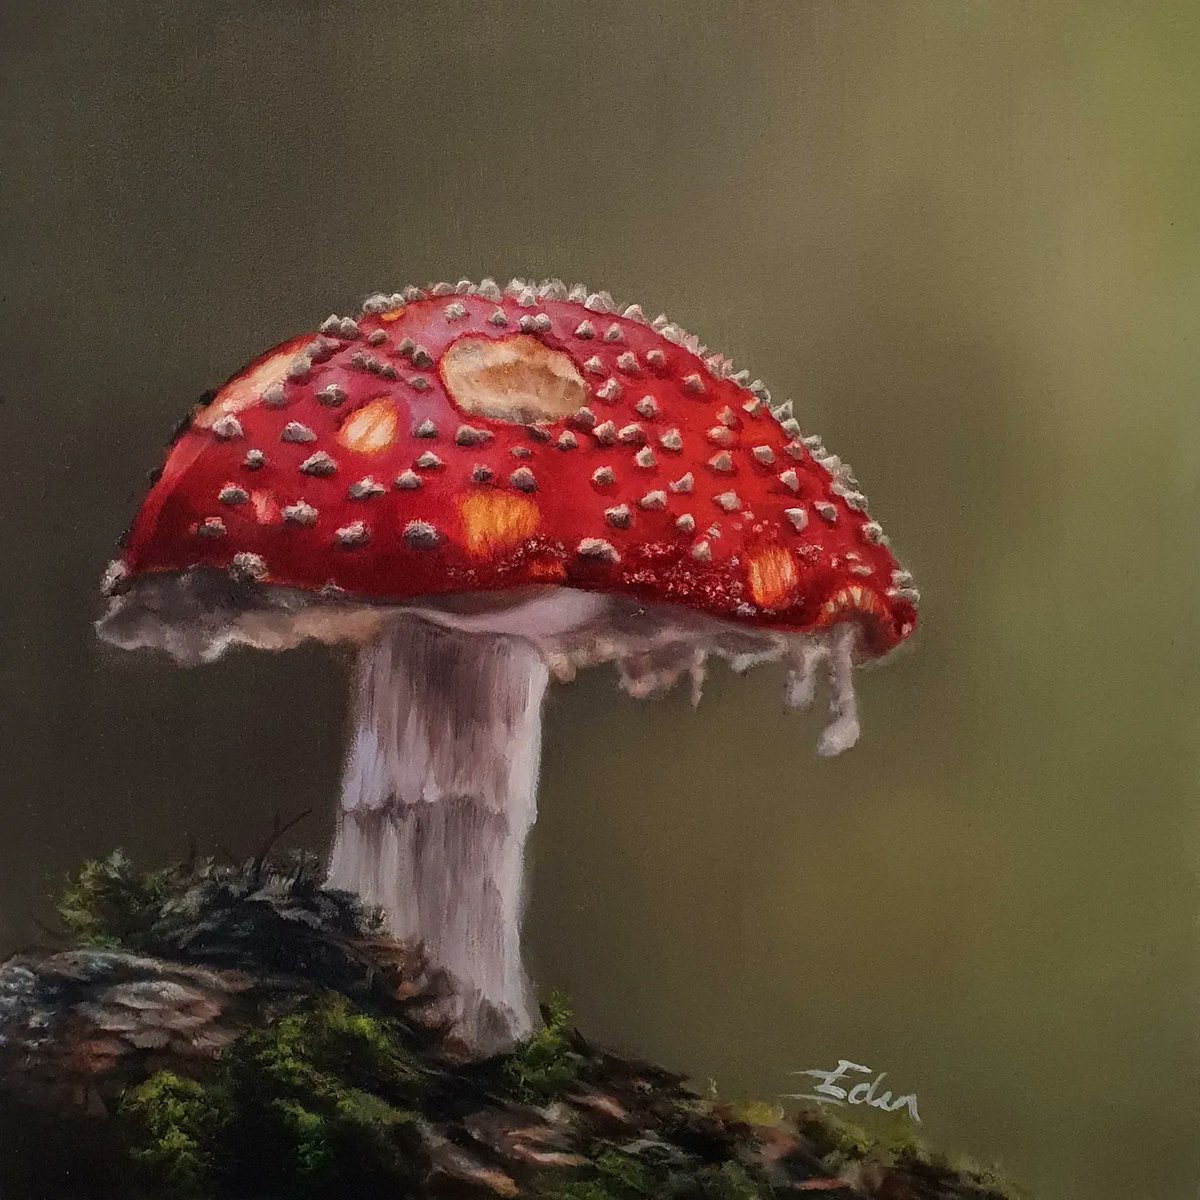 About to paint another of these little gems.

Prints still available of this one. 

#flyagaric #toadstool #mushroom #fungi #flora #britishflora #Britishcountryside #wonderfulnature #toadstoolpainting #oilpainting